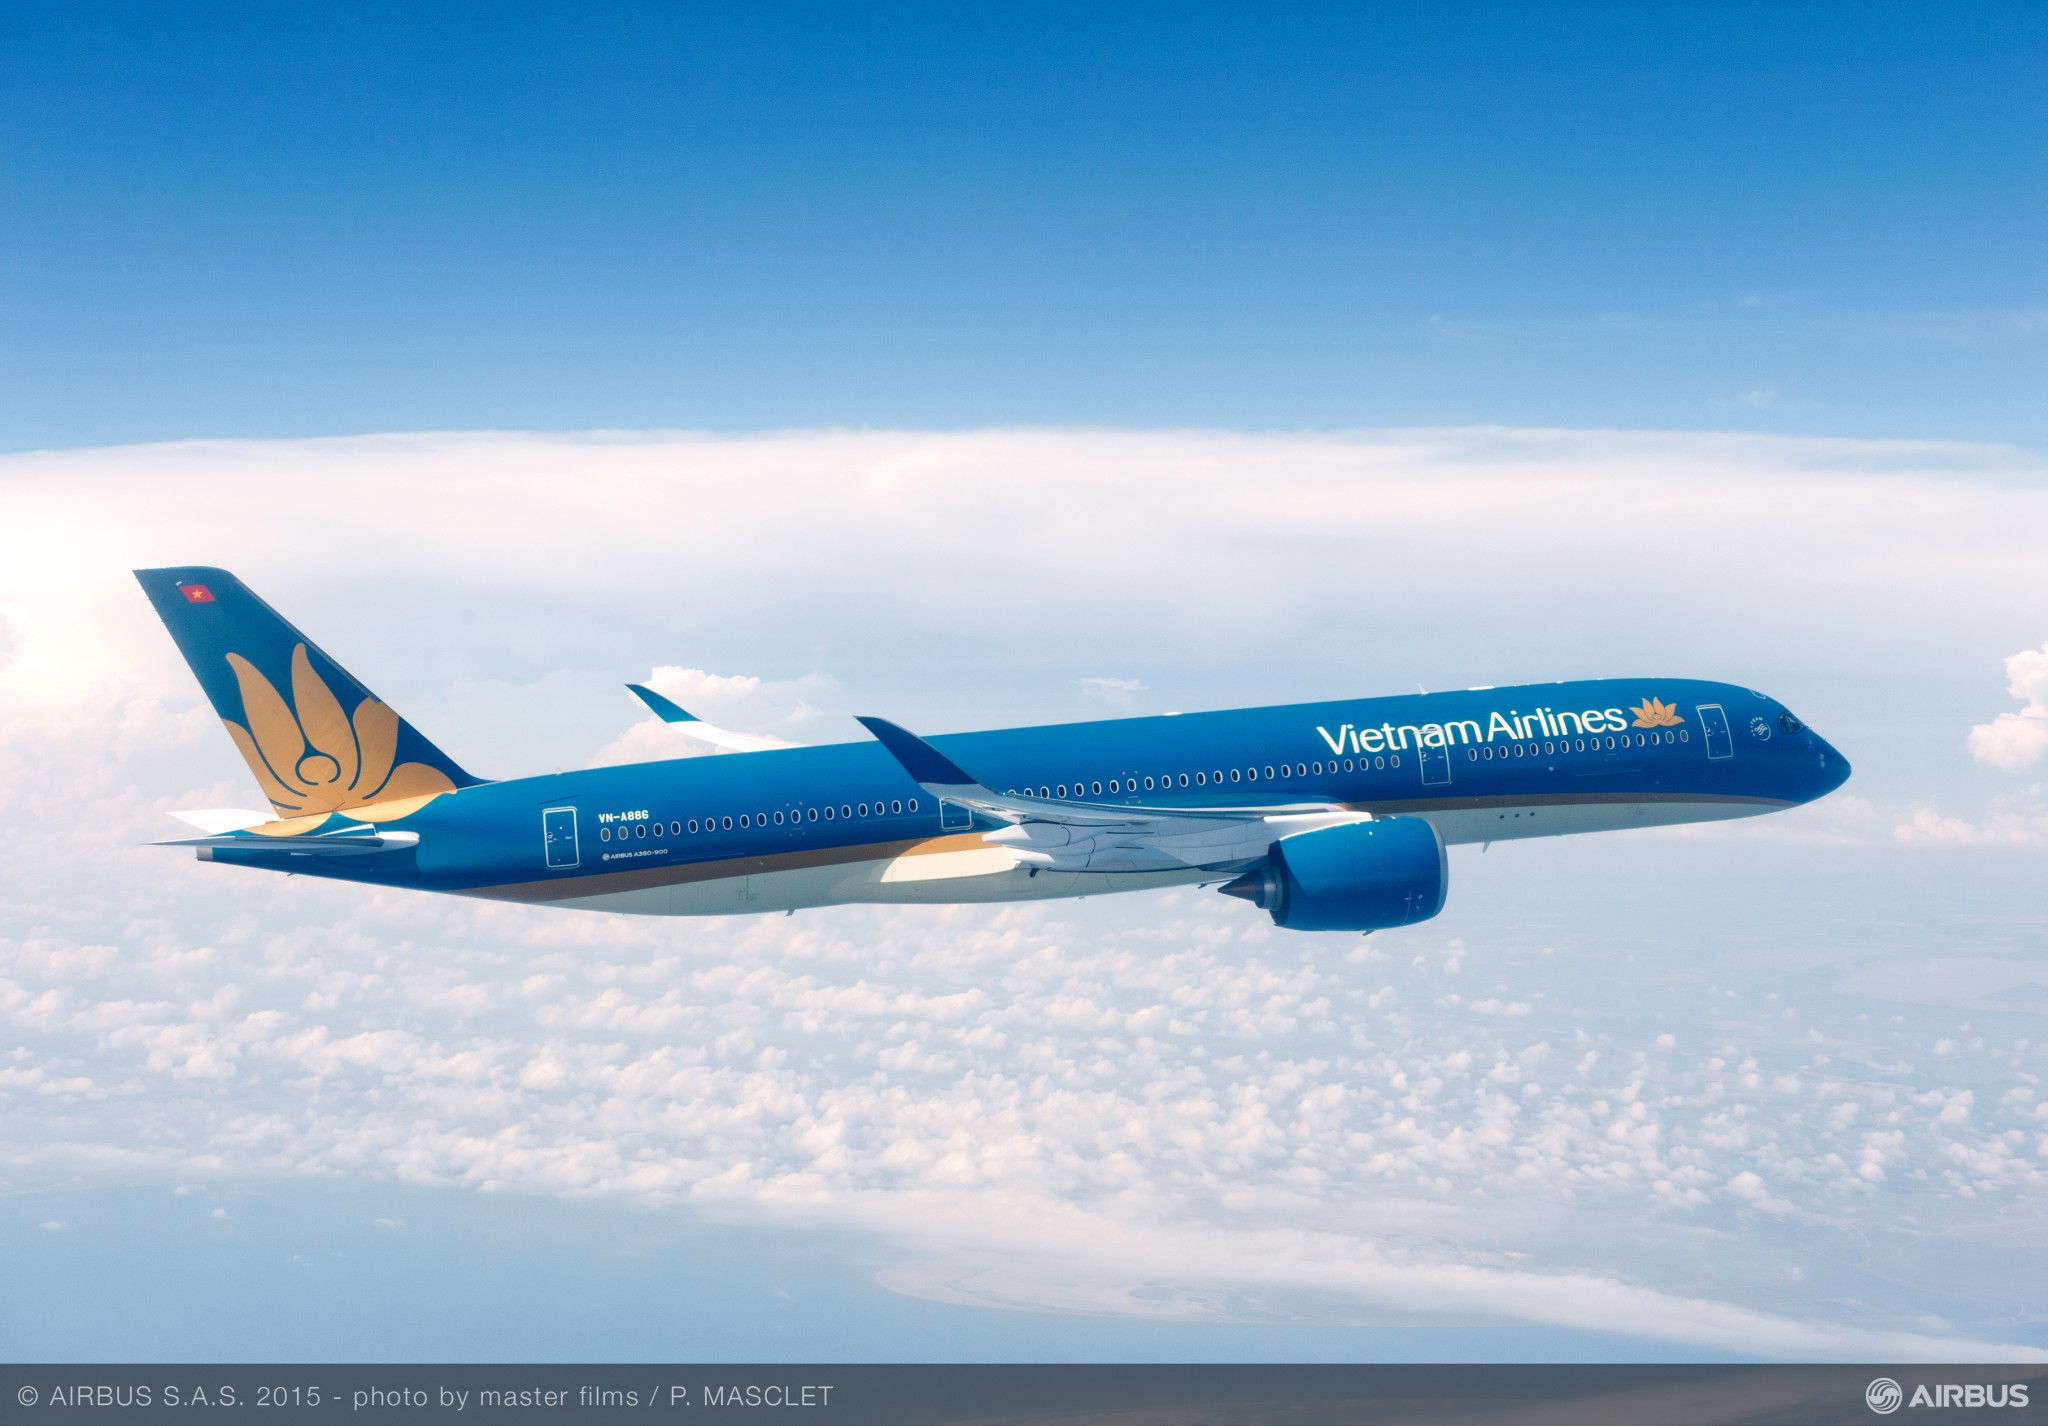 Vietnam Airlines restores to pre-pandemic capacity on China routes